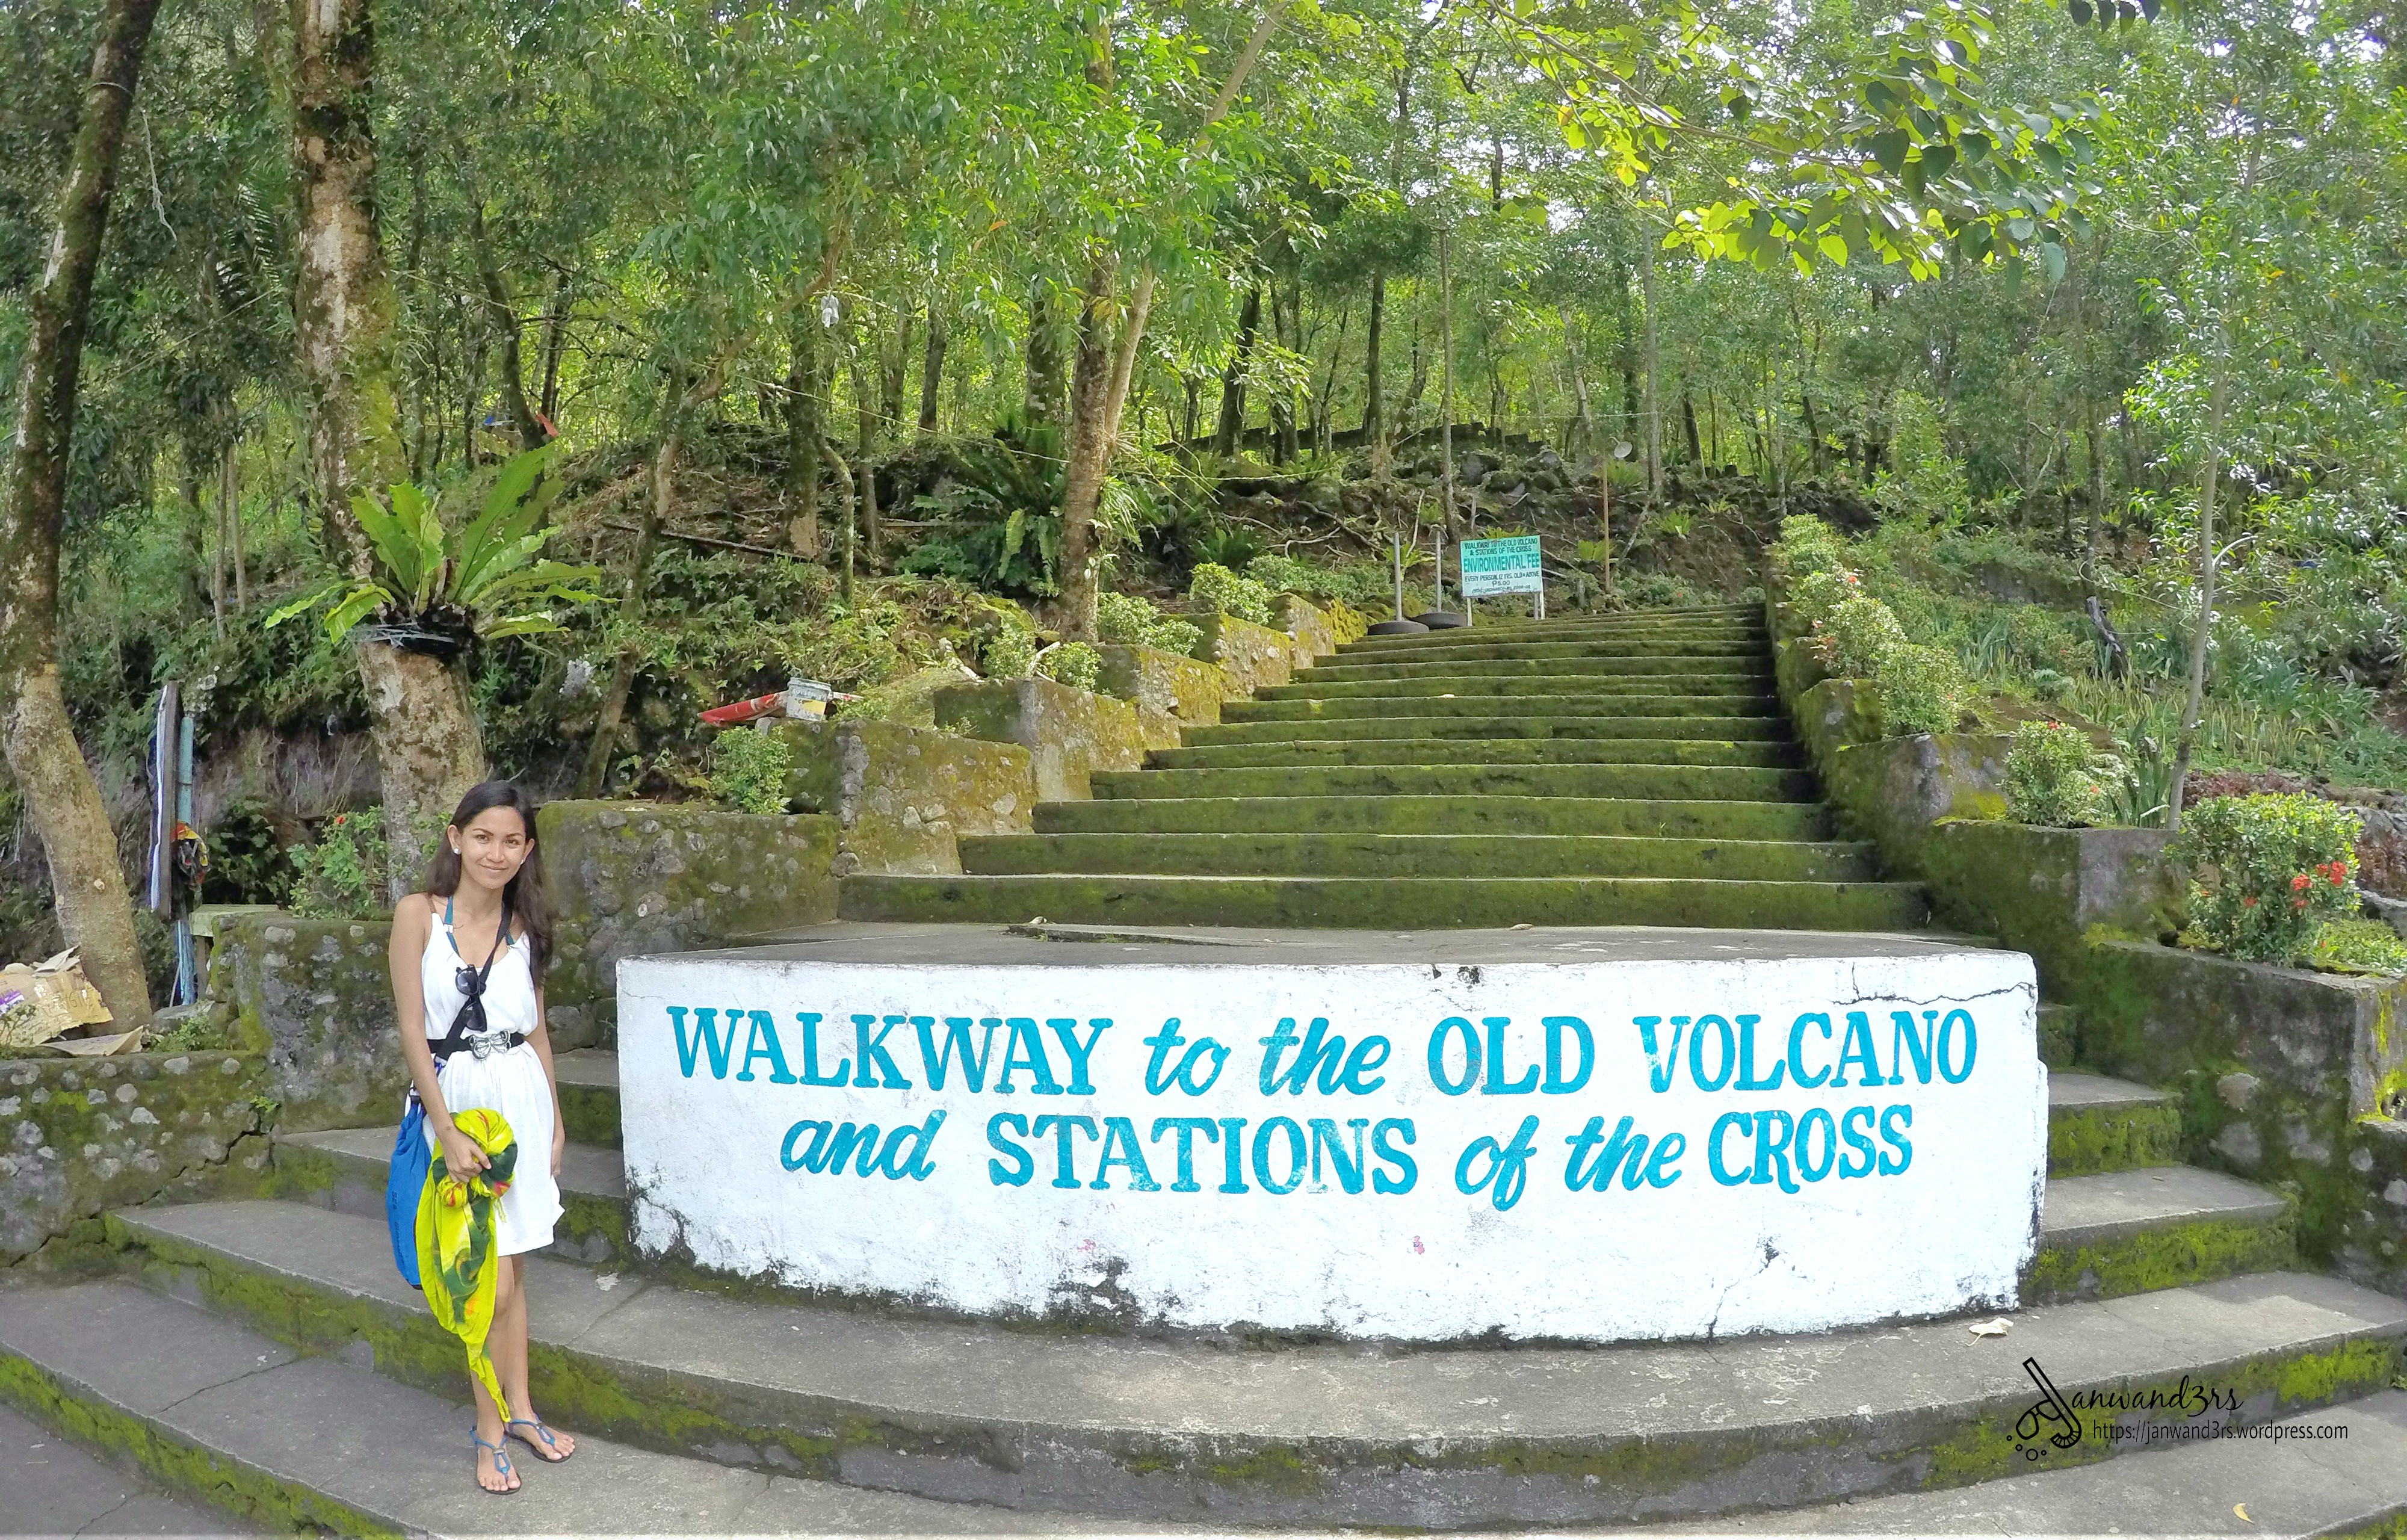 stations-of-the-cross-camiguin.jpg